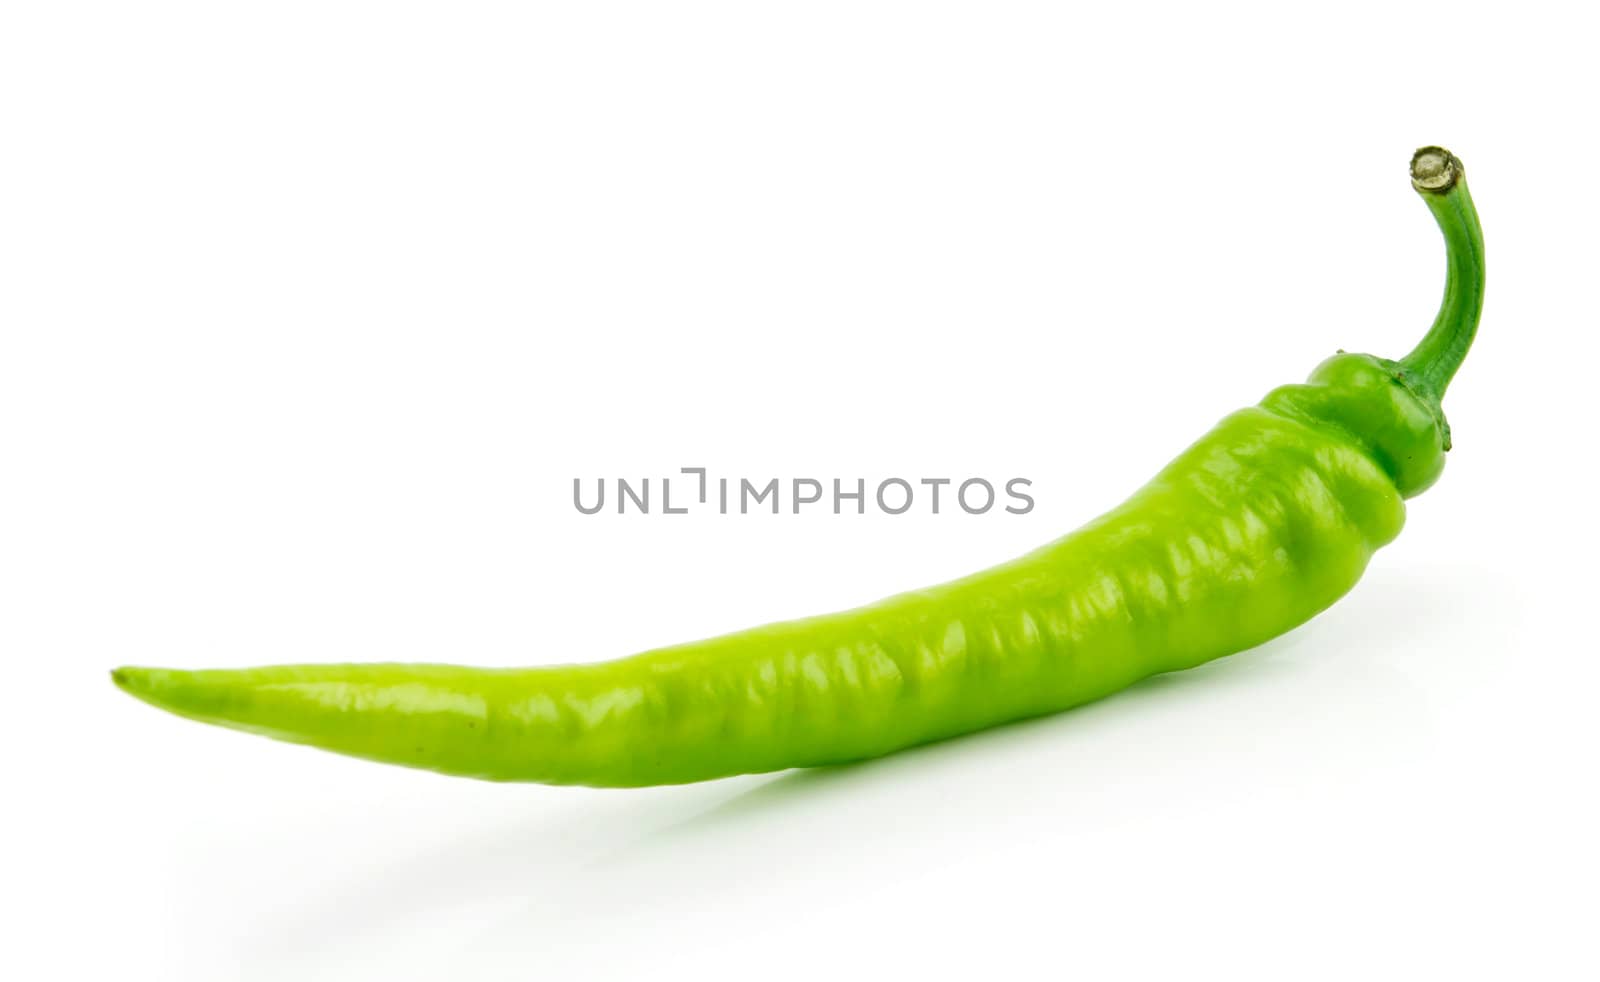 Green Chili Pepper Isolated on White Background